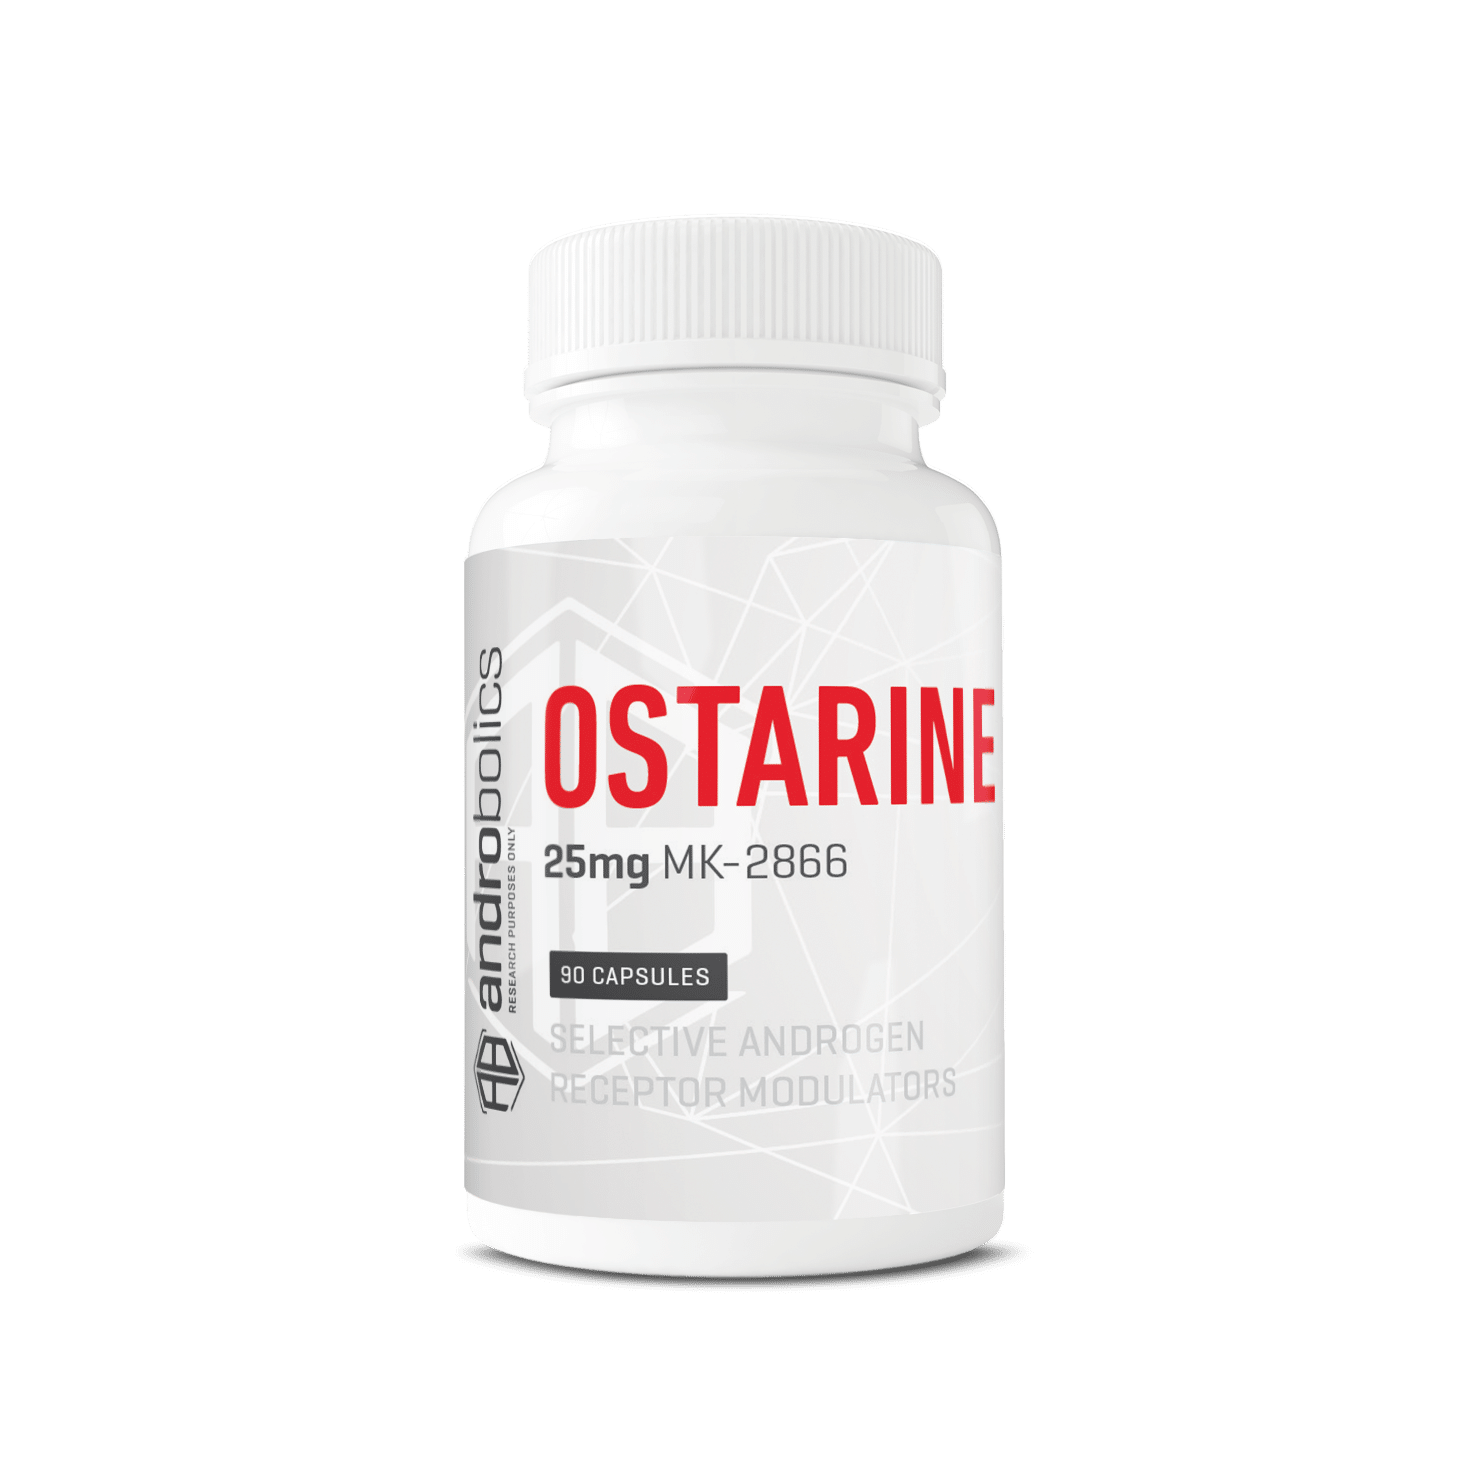 Ostarine MK-2866 - 90 Capsules of 25mg for Improved Muscle Mass and Strength